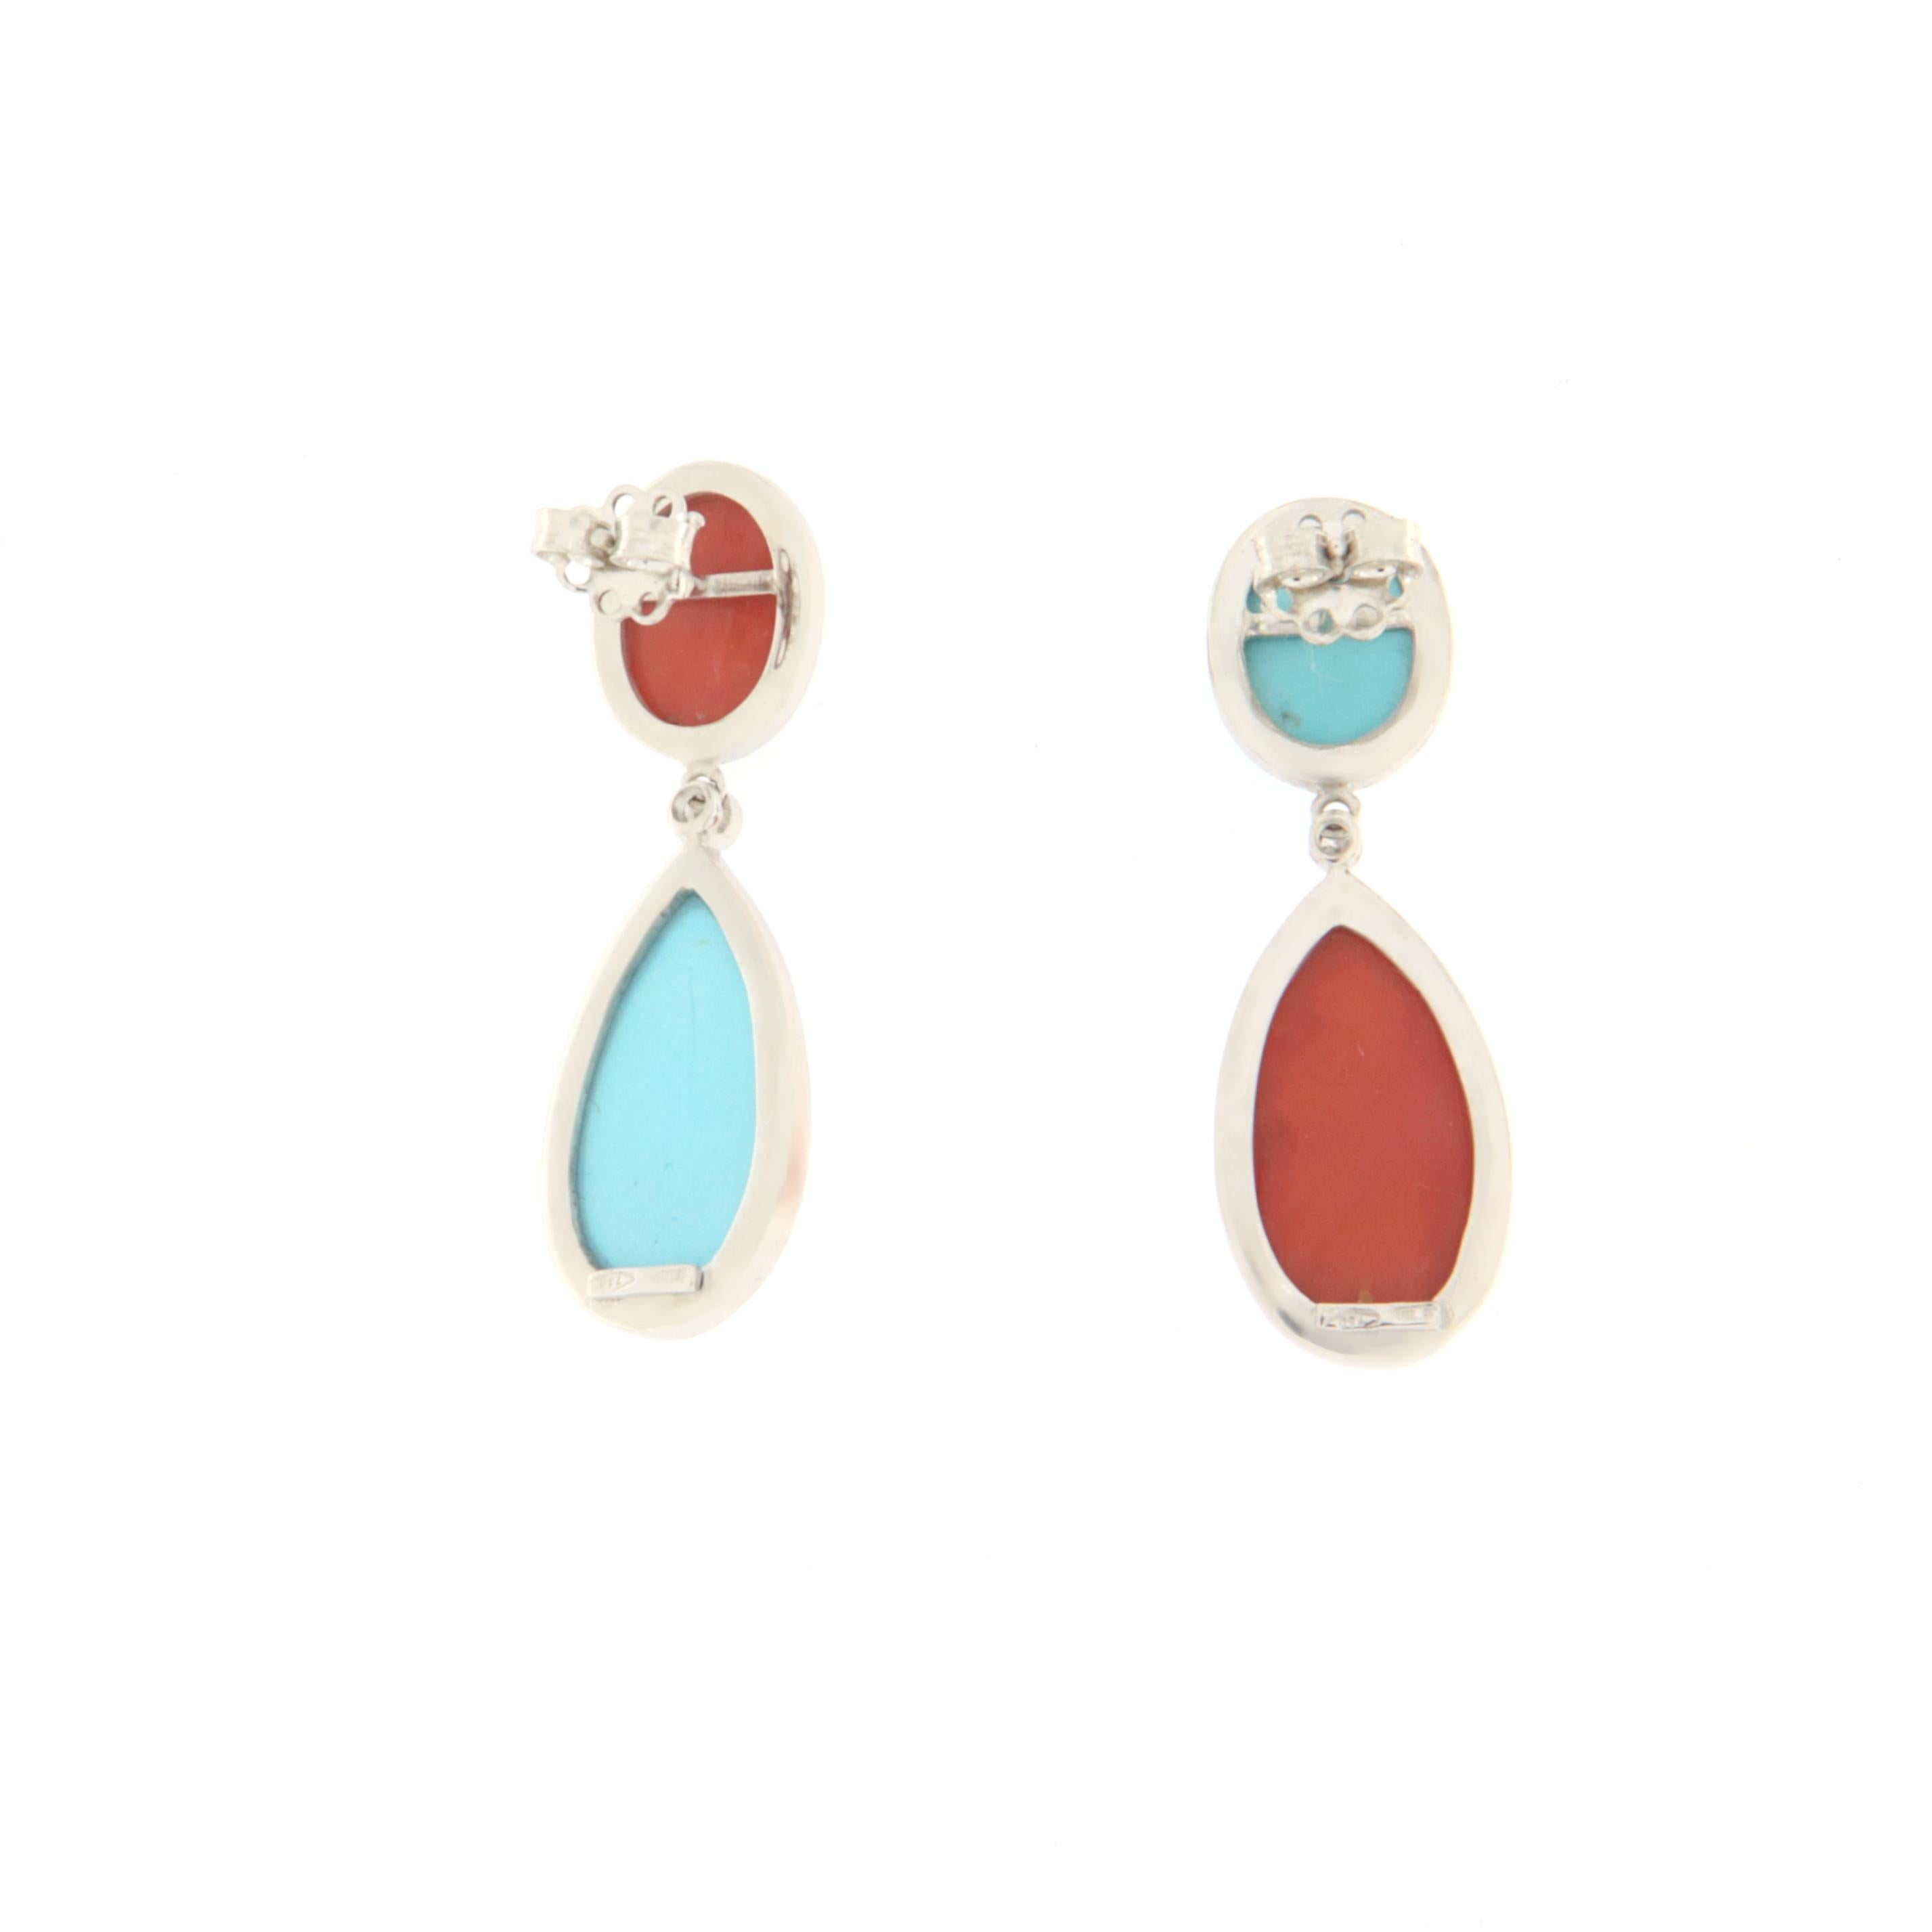 Fantastic earrings made entirely by hand by expert master craftsmen. Made of 18 Karat white gold with natural diamonds coral and turquoise.

Total Weight earrings 13.90 grams
Diamonds Karat 0.04
Coral weight 3.40 grams
Turquoise weight 2.80 grams


